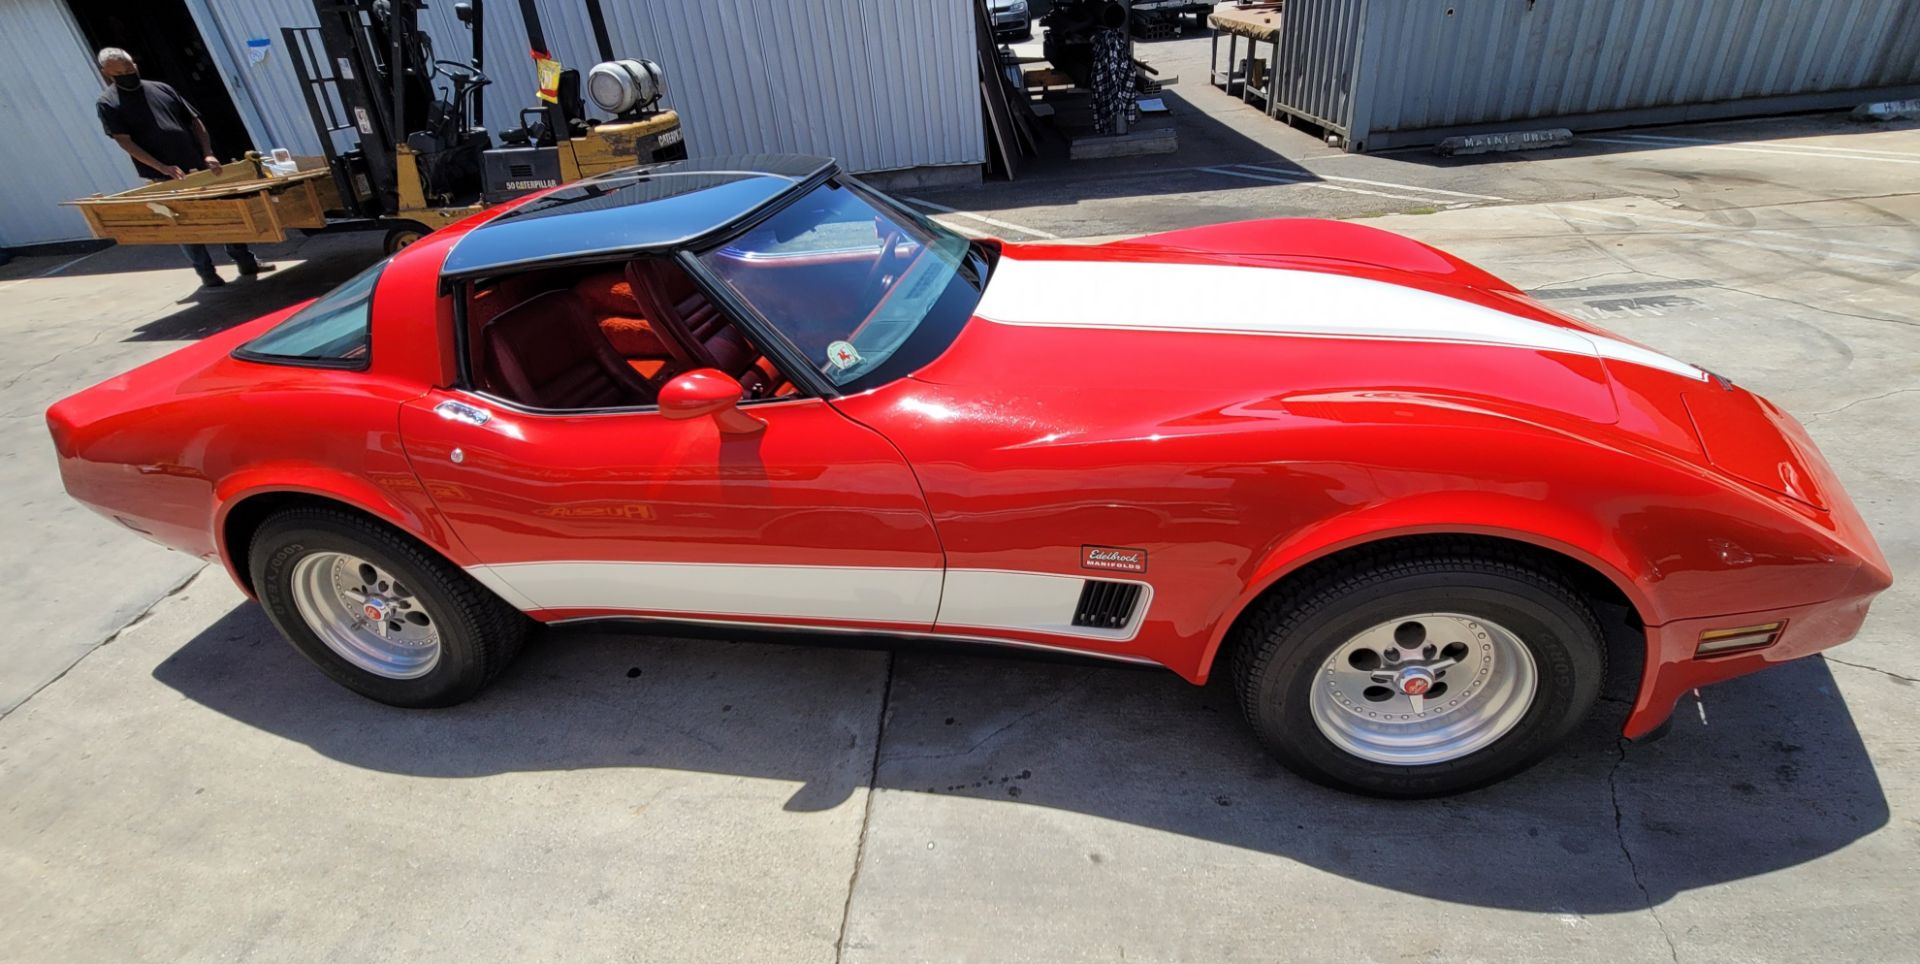 1980 CHEVROLET CORVETTE, WAS VIC EDELBROCK'S PERSONAL CAR BOUGHT FOR R&D, RED INTERIOR, TITLE ONLY. - Image 11 of 70